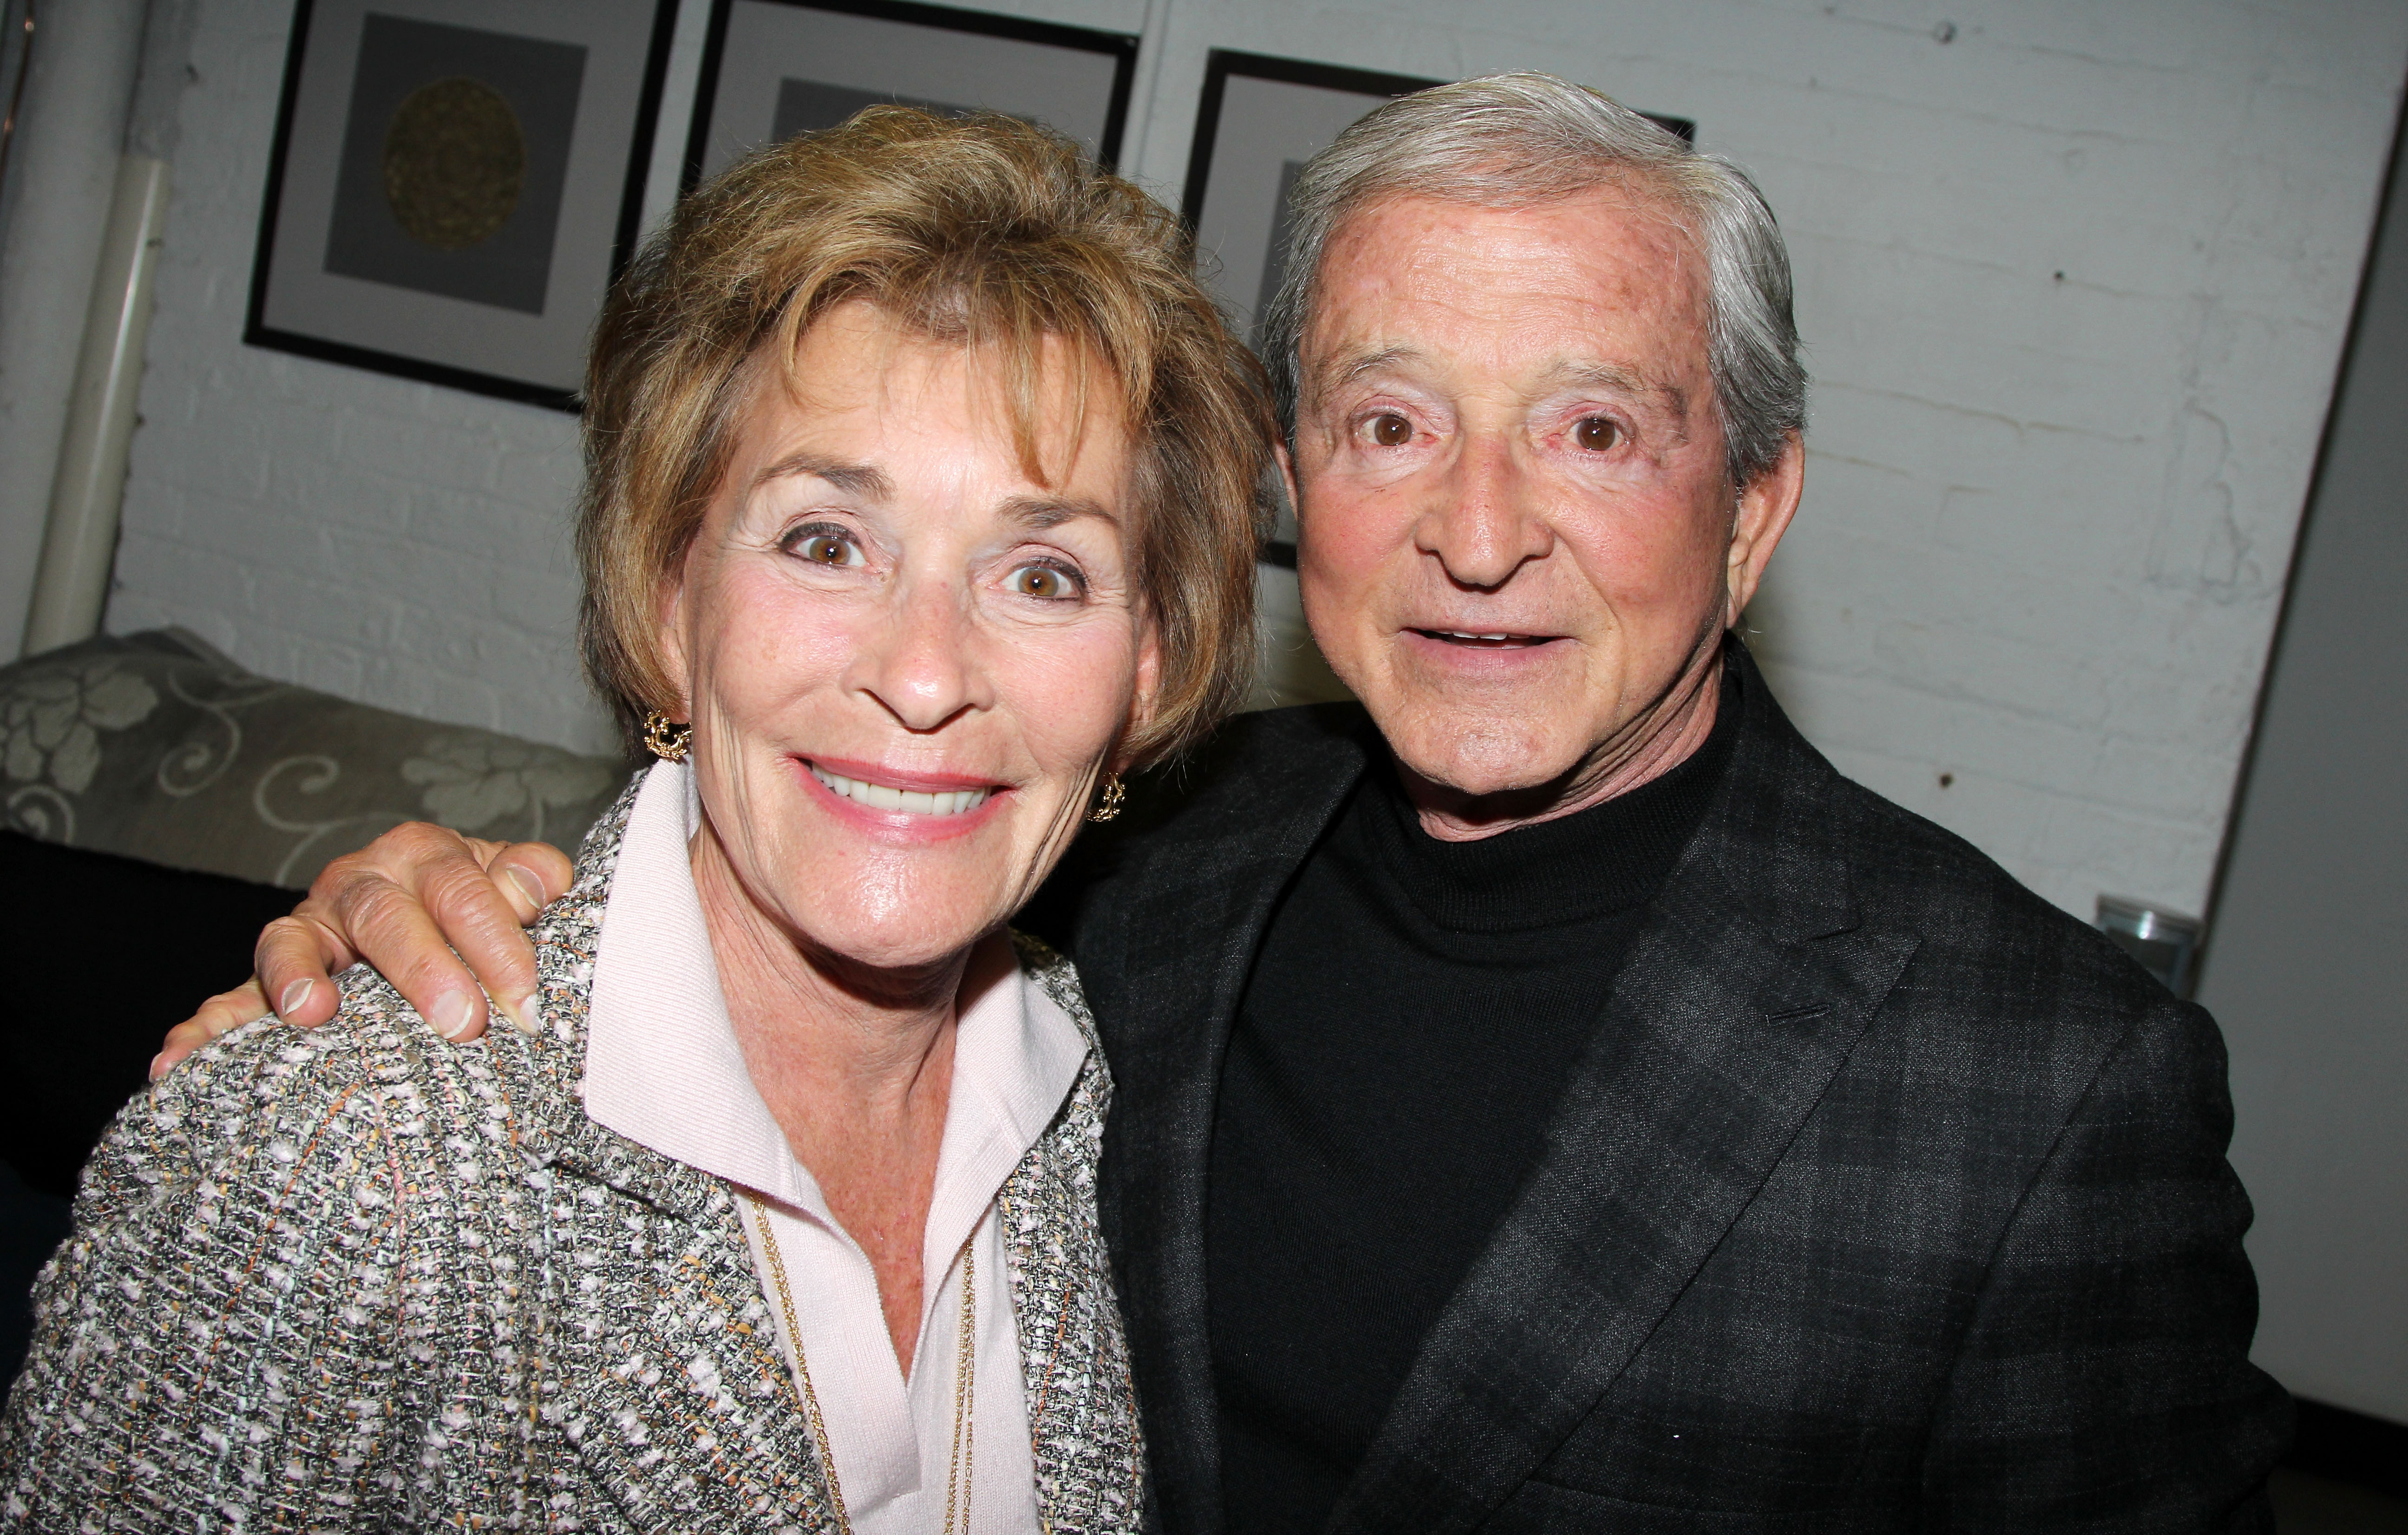 Judy Sheindlin and Jerry Sheindlin at "The Performers" on Broadway at The Longacre Theater on November 10, 2012 in New York City. | Source: Getty Images